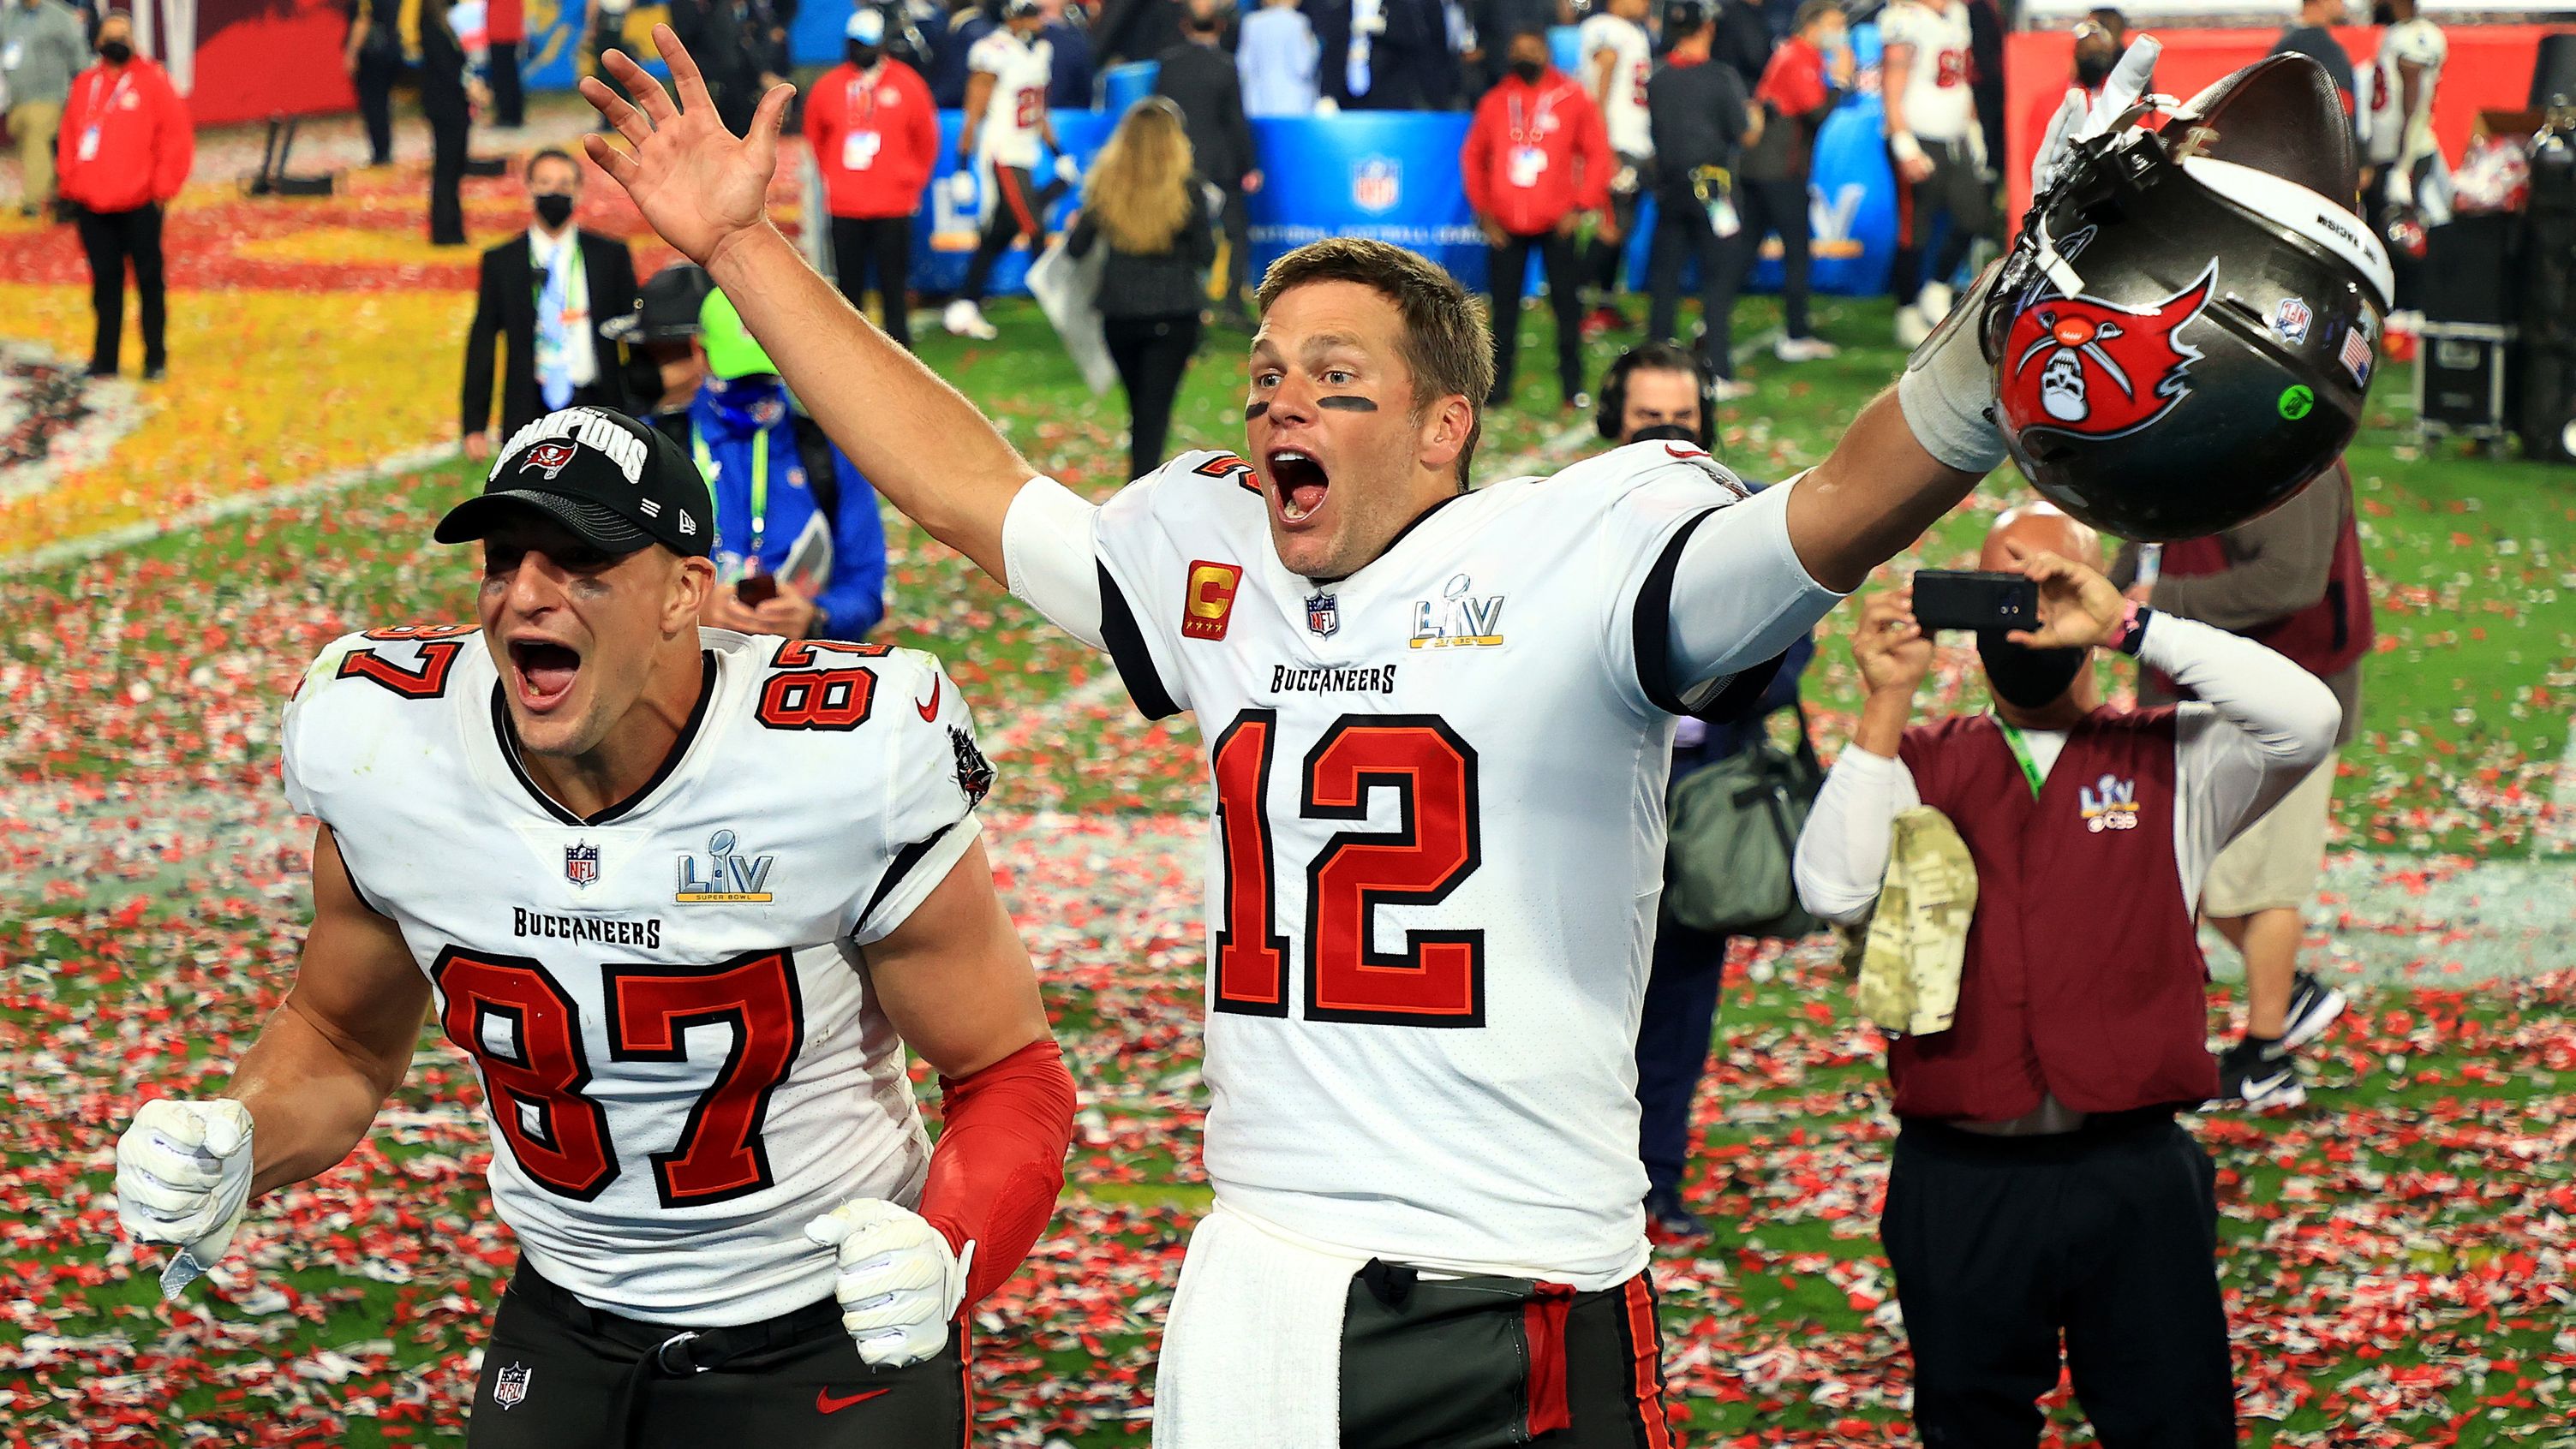 TAMPA, FLORIDA - FEBRUARY 07: Rob Gronkowski #87 and Tom Brady #12 of the Tampa Bay Buccaneers celebrate after defeating the Kansas City Chiefs in Super Bowl LV at Raymond James Stadium on February 07, 2021 in Tampa, Florida. The Buccaneers defeated the Chiefs 31-9. (Photo by Mike Ehrmann/Getty Images)